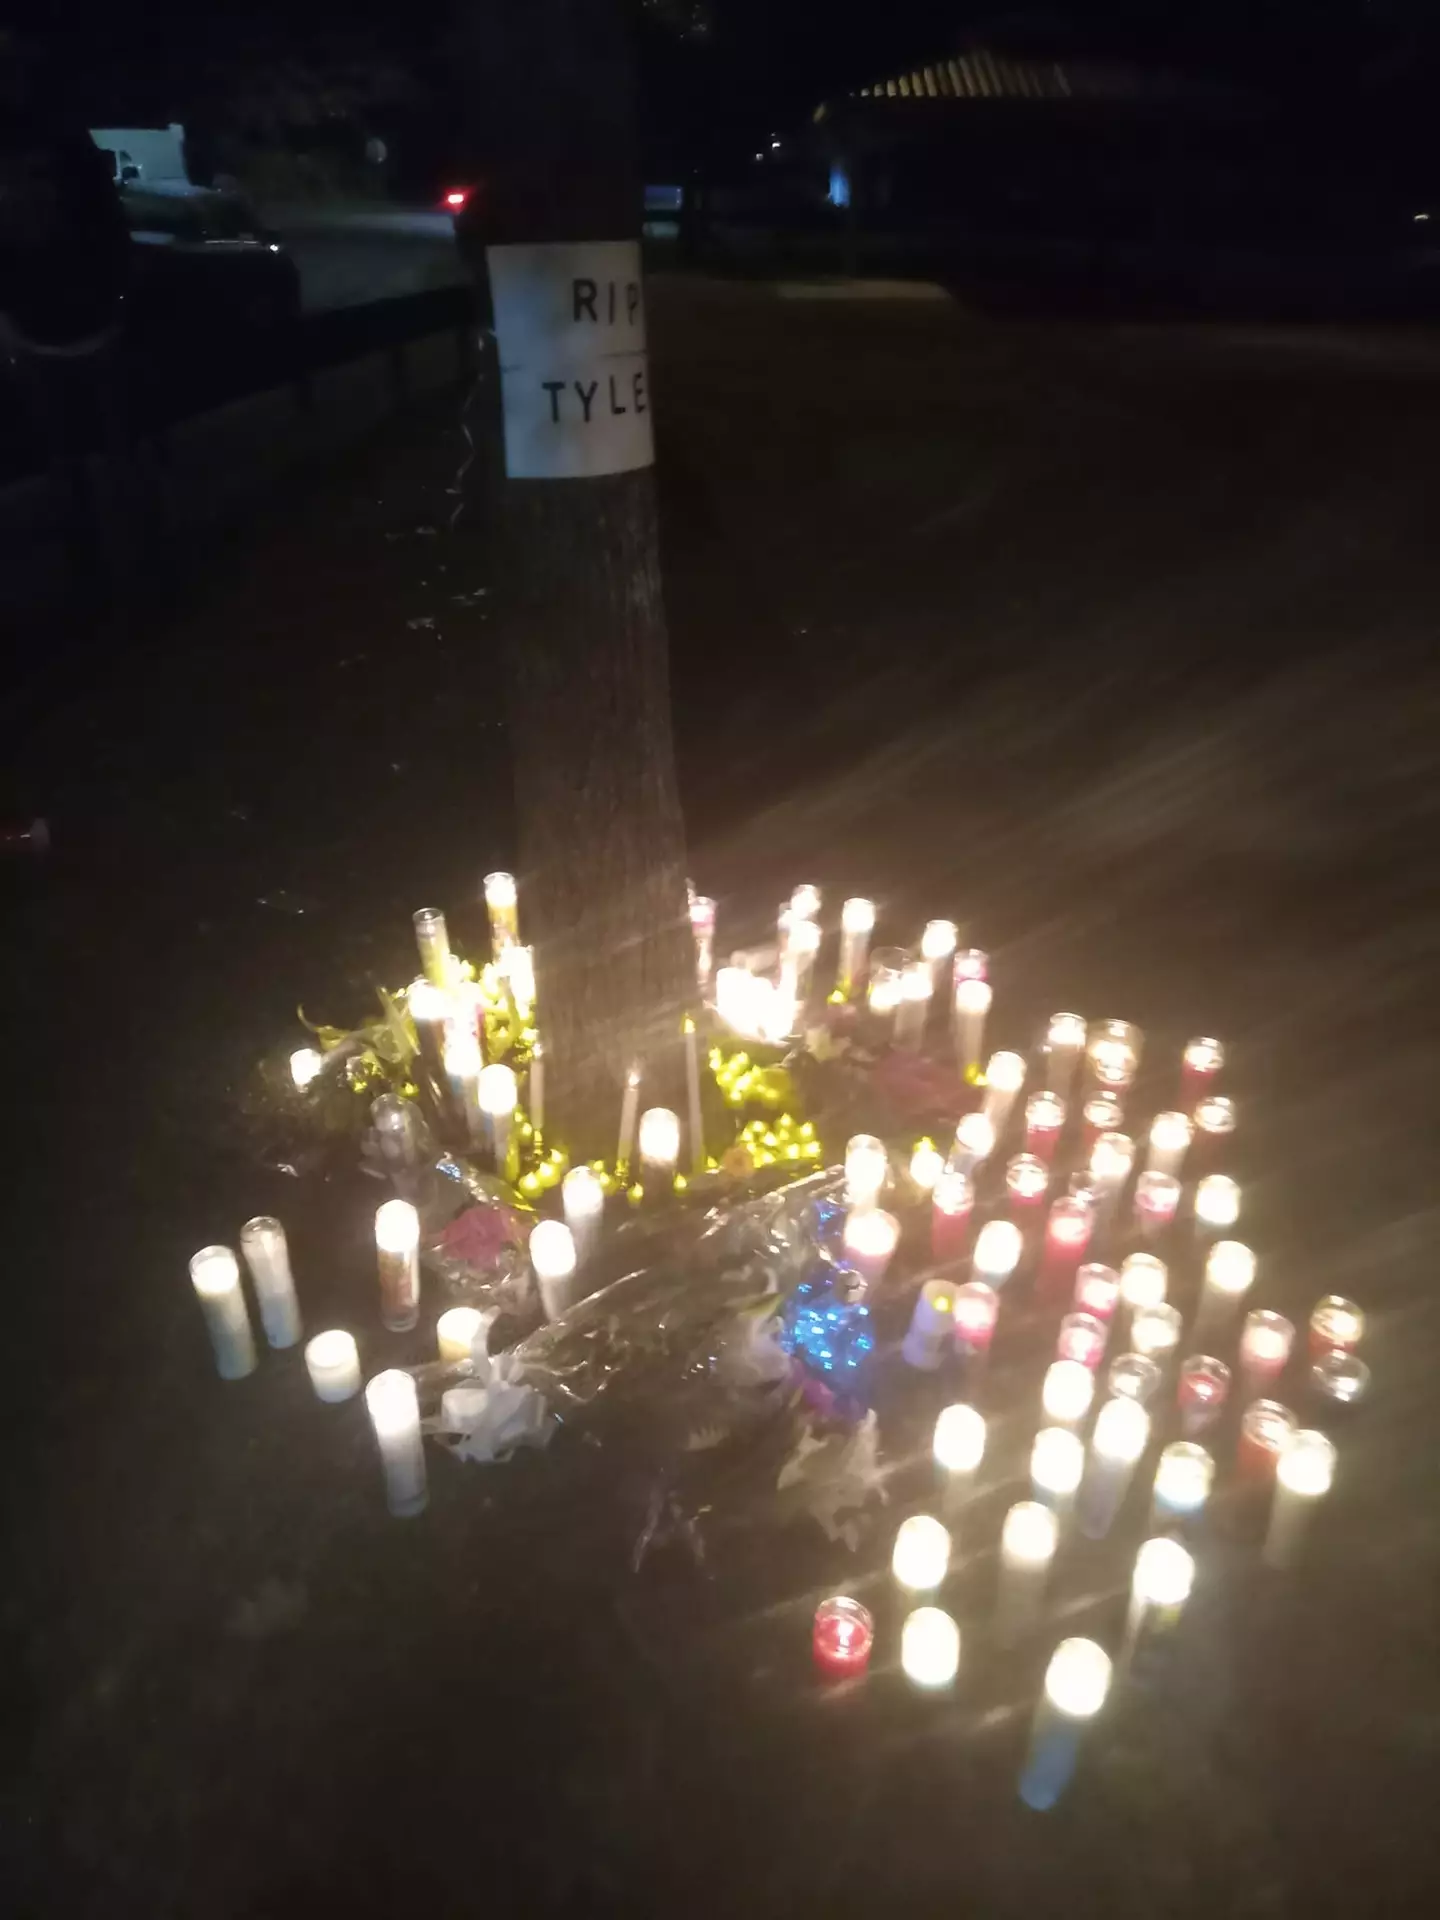 A candlelit vigil is being held for Tyler today Friday, 21 October.